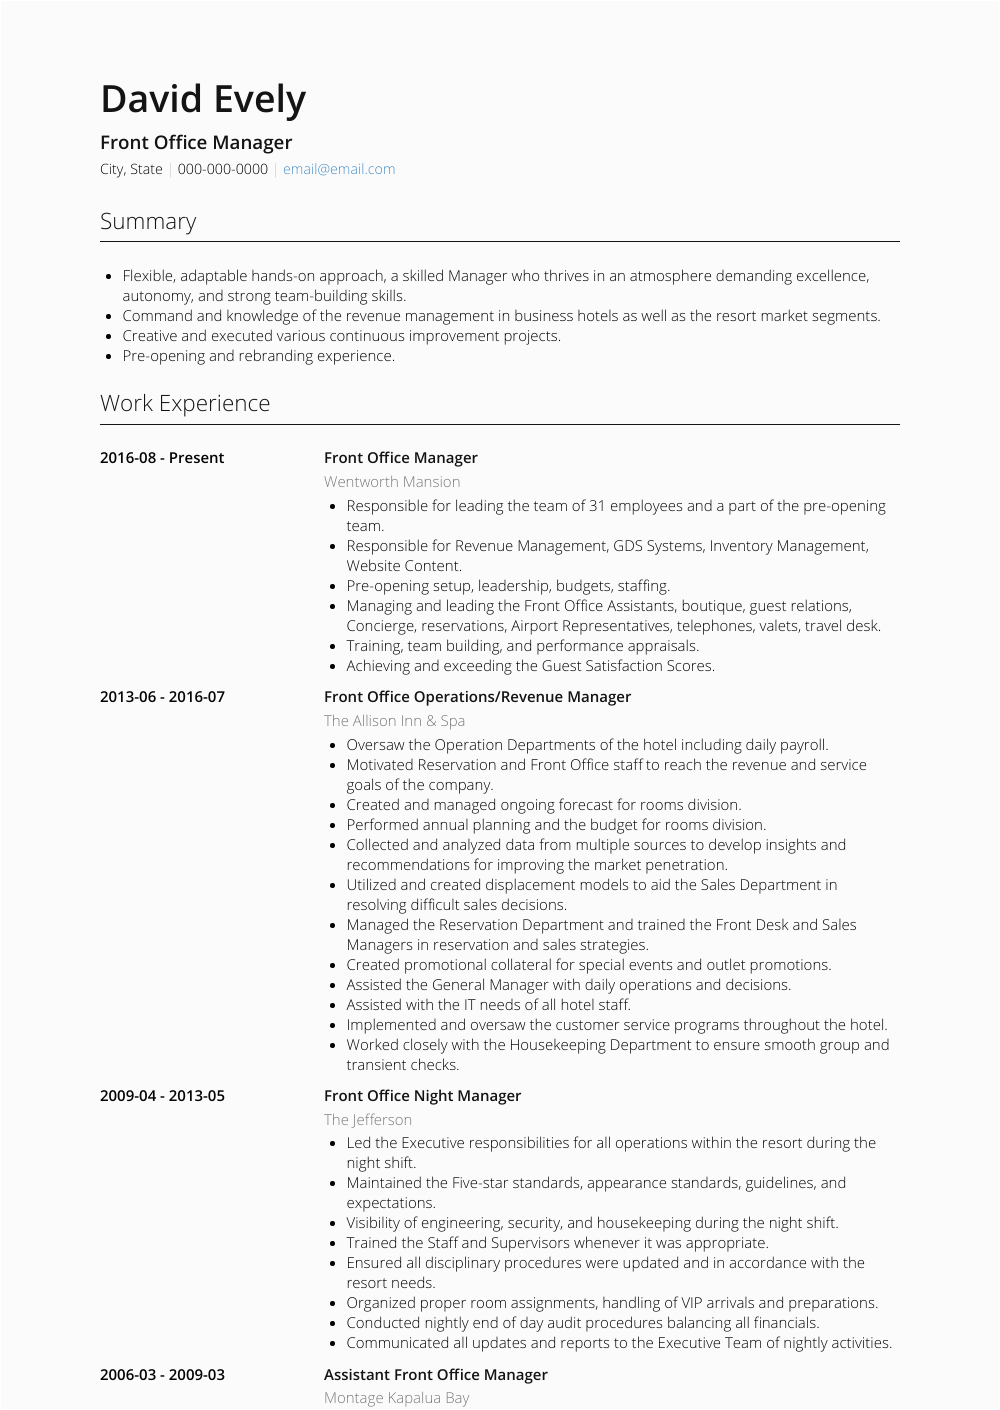 Front Office Manager at Hotel Sample Resume 50 Hotel Front Desk Manager Resume Addictips